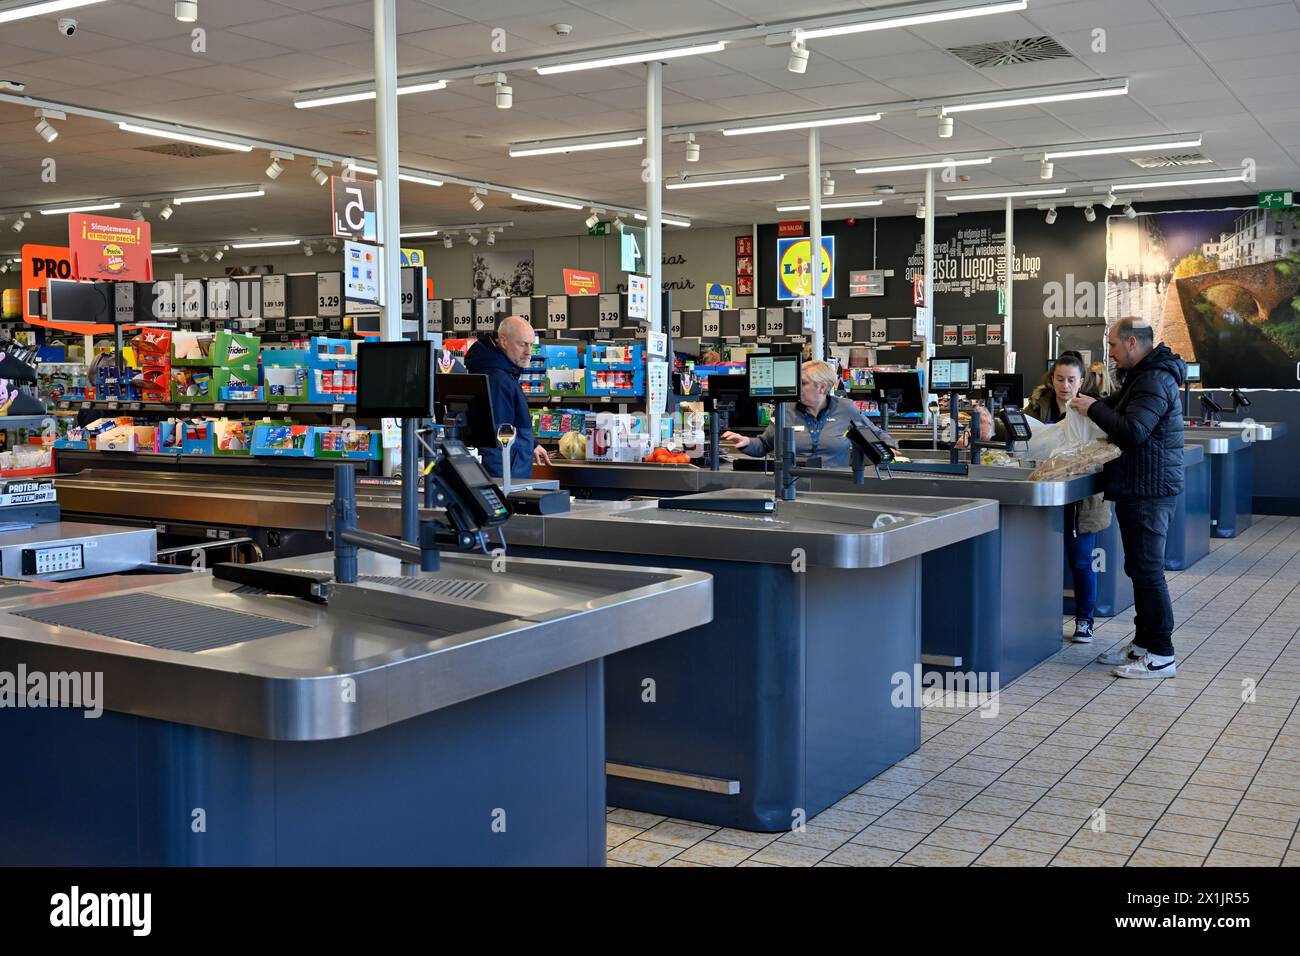 Row of checkout counters in Lidl supermarket Stock Photo